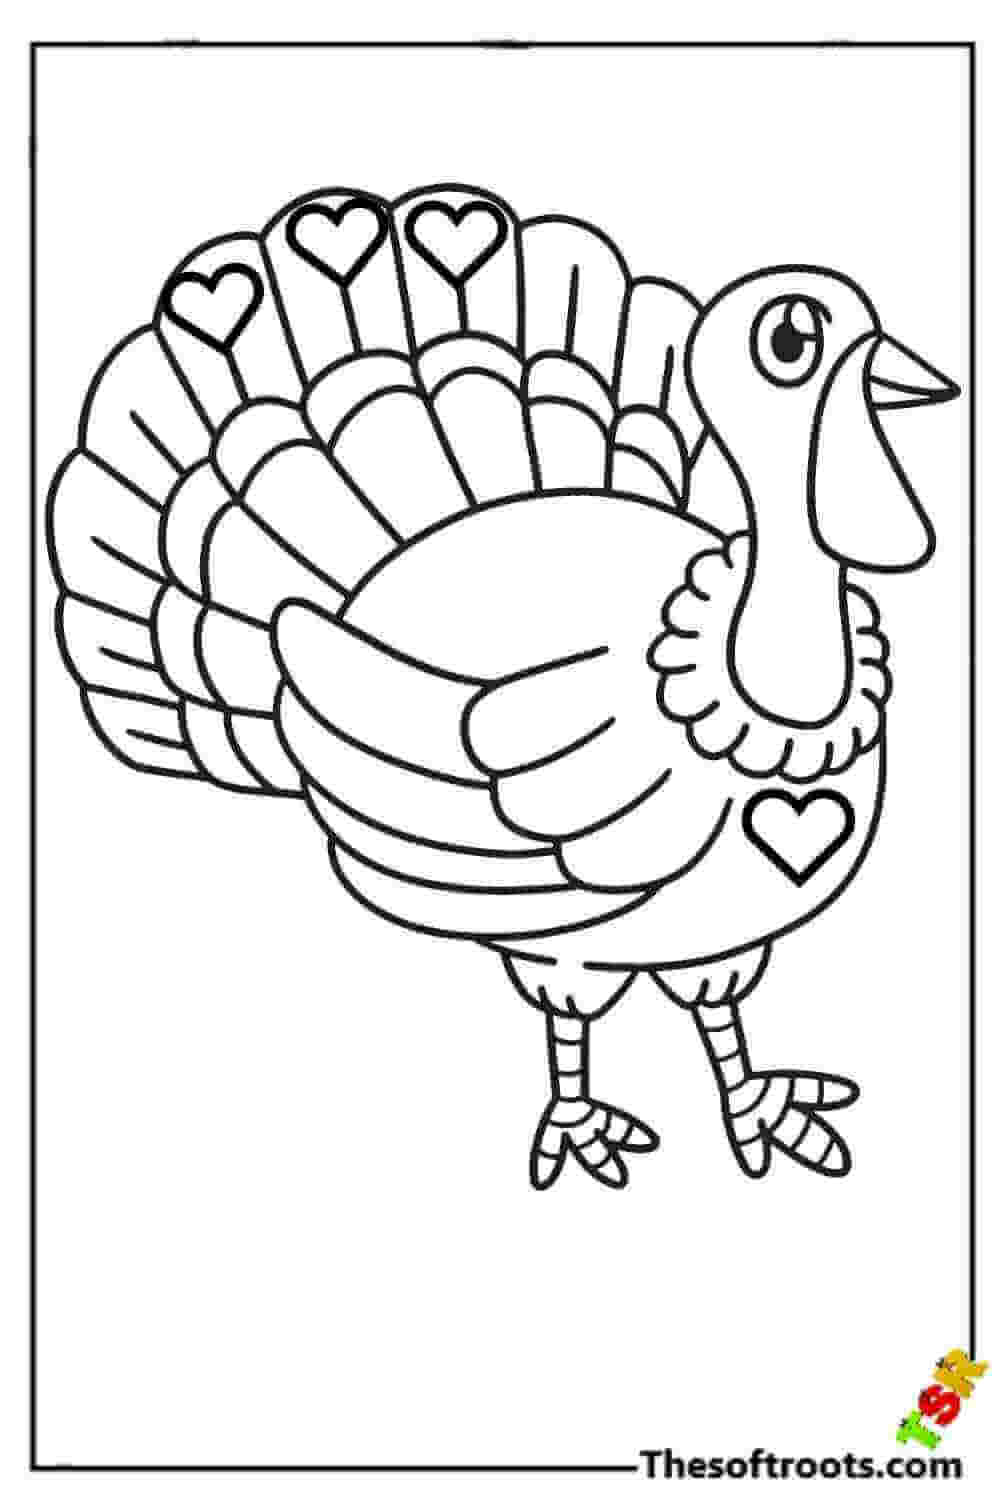 Turkey coloring pages for kids